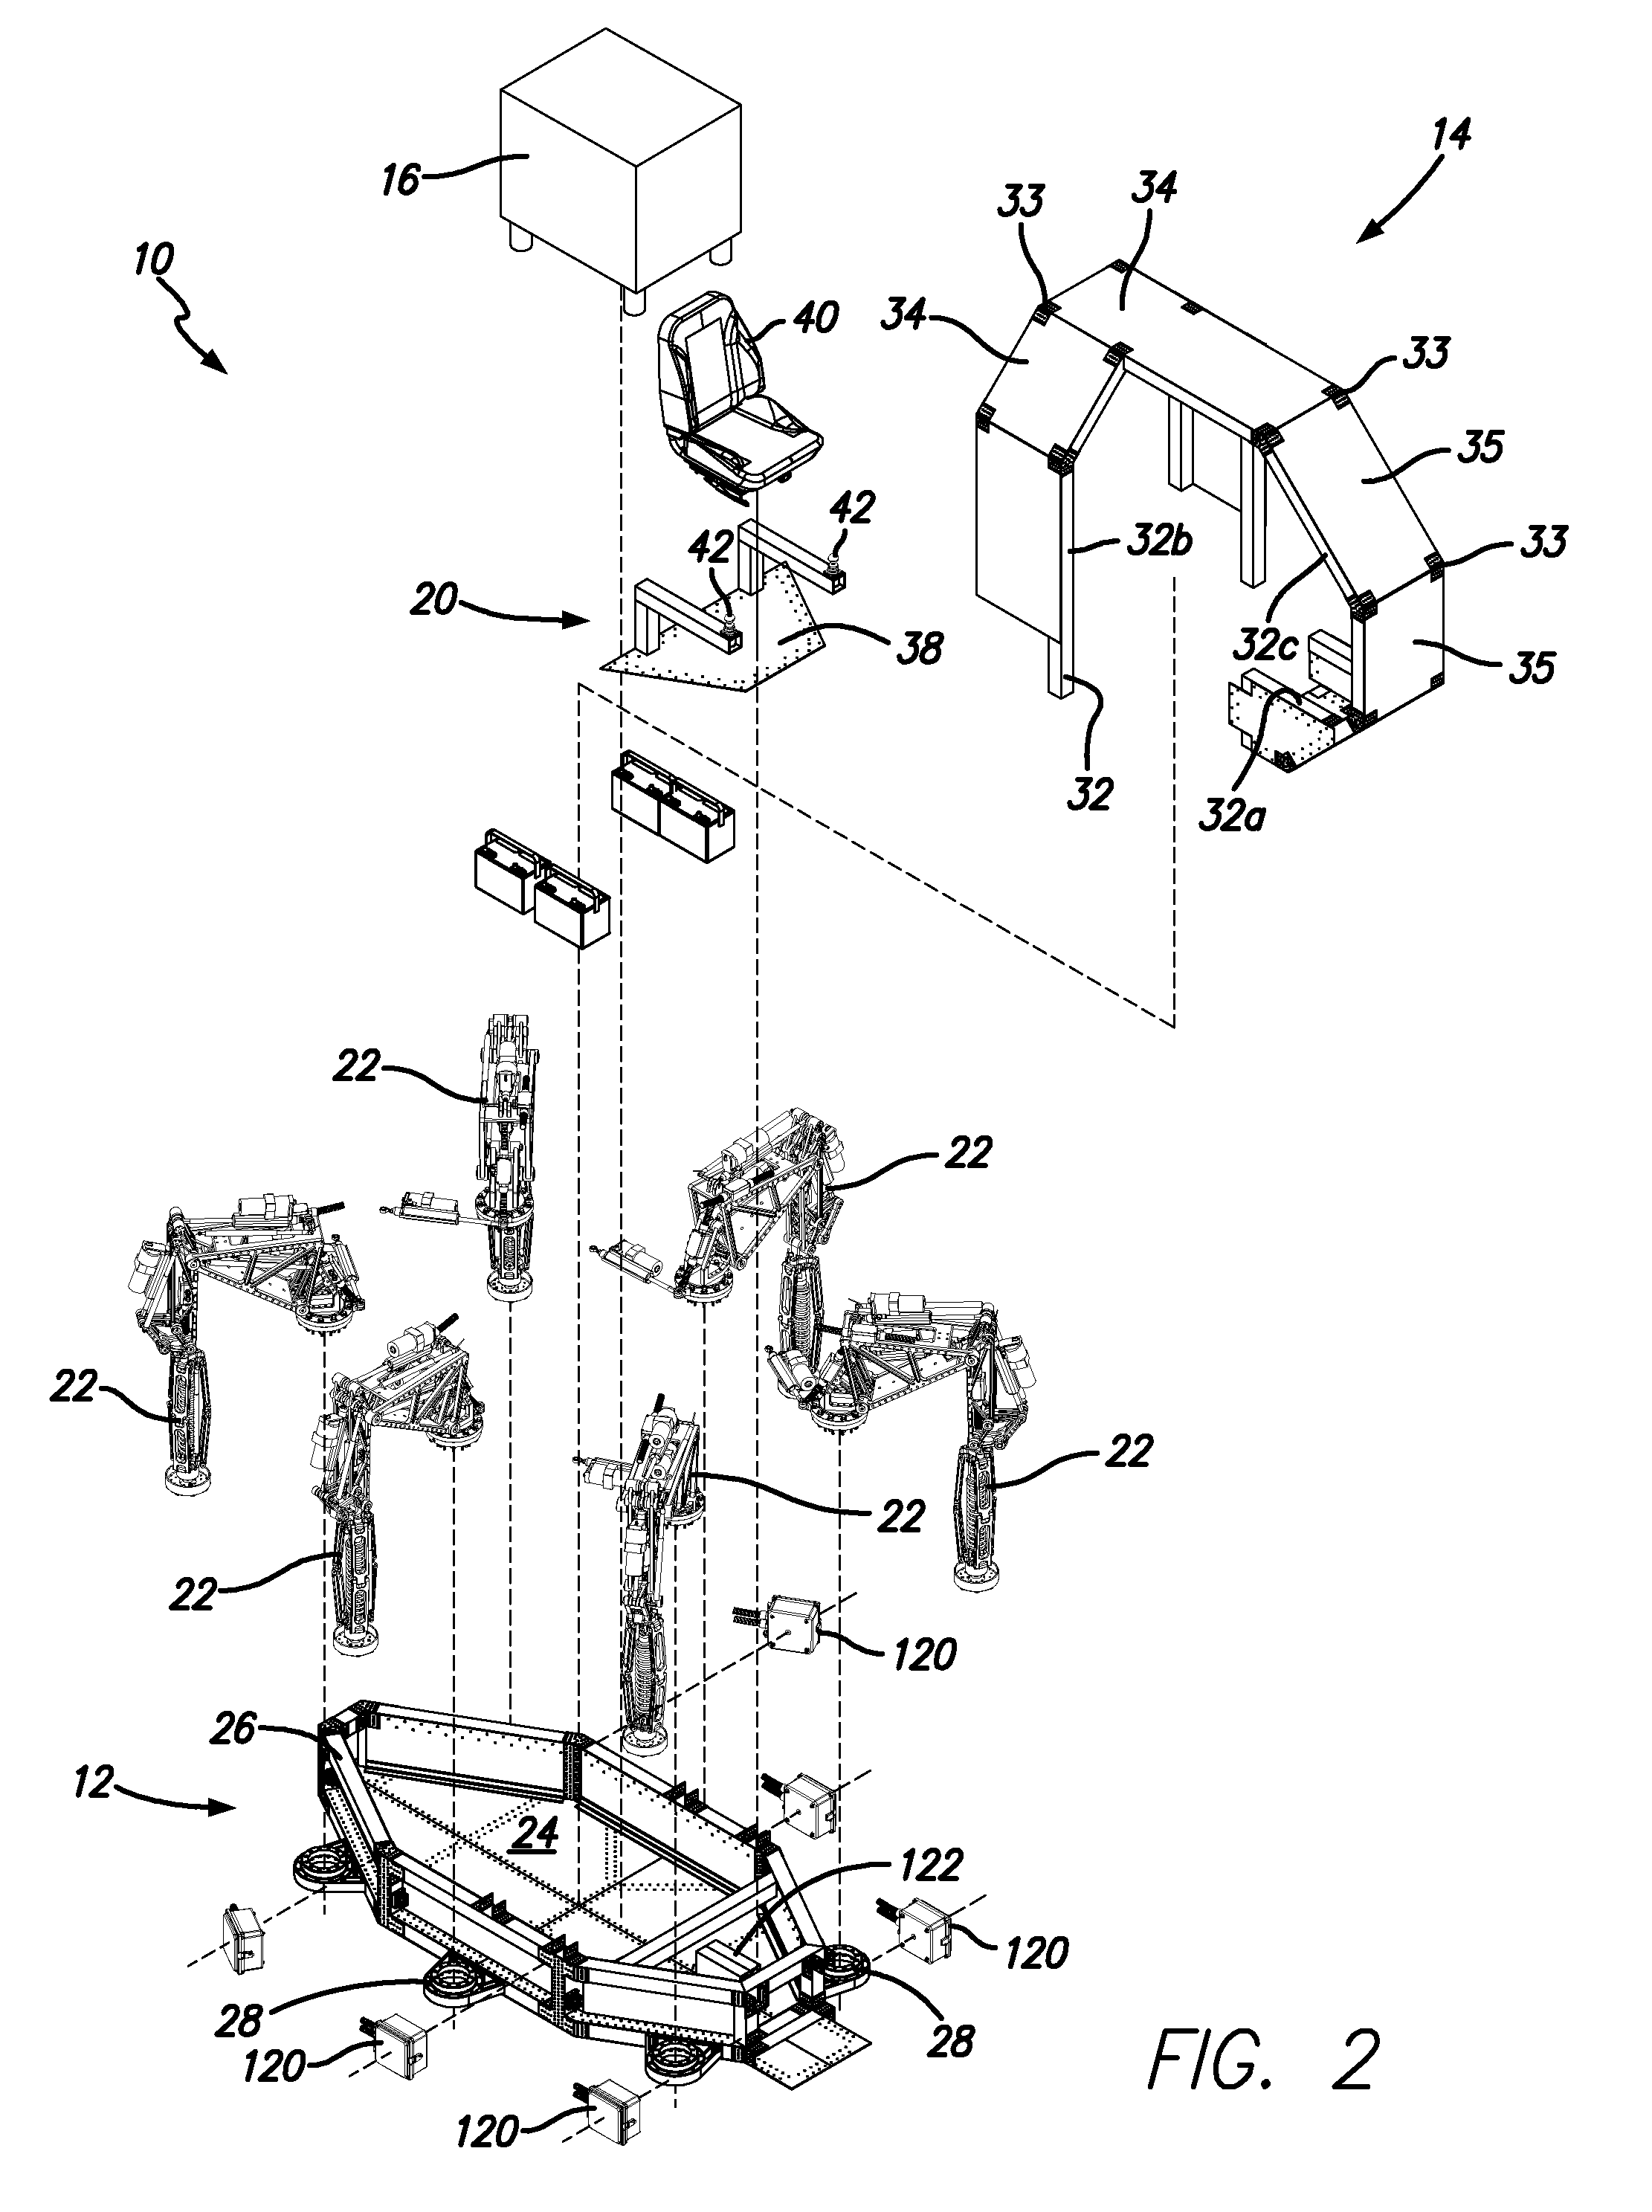 Statically stable walking machine and power system therefor